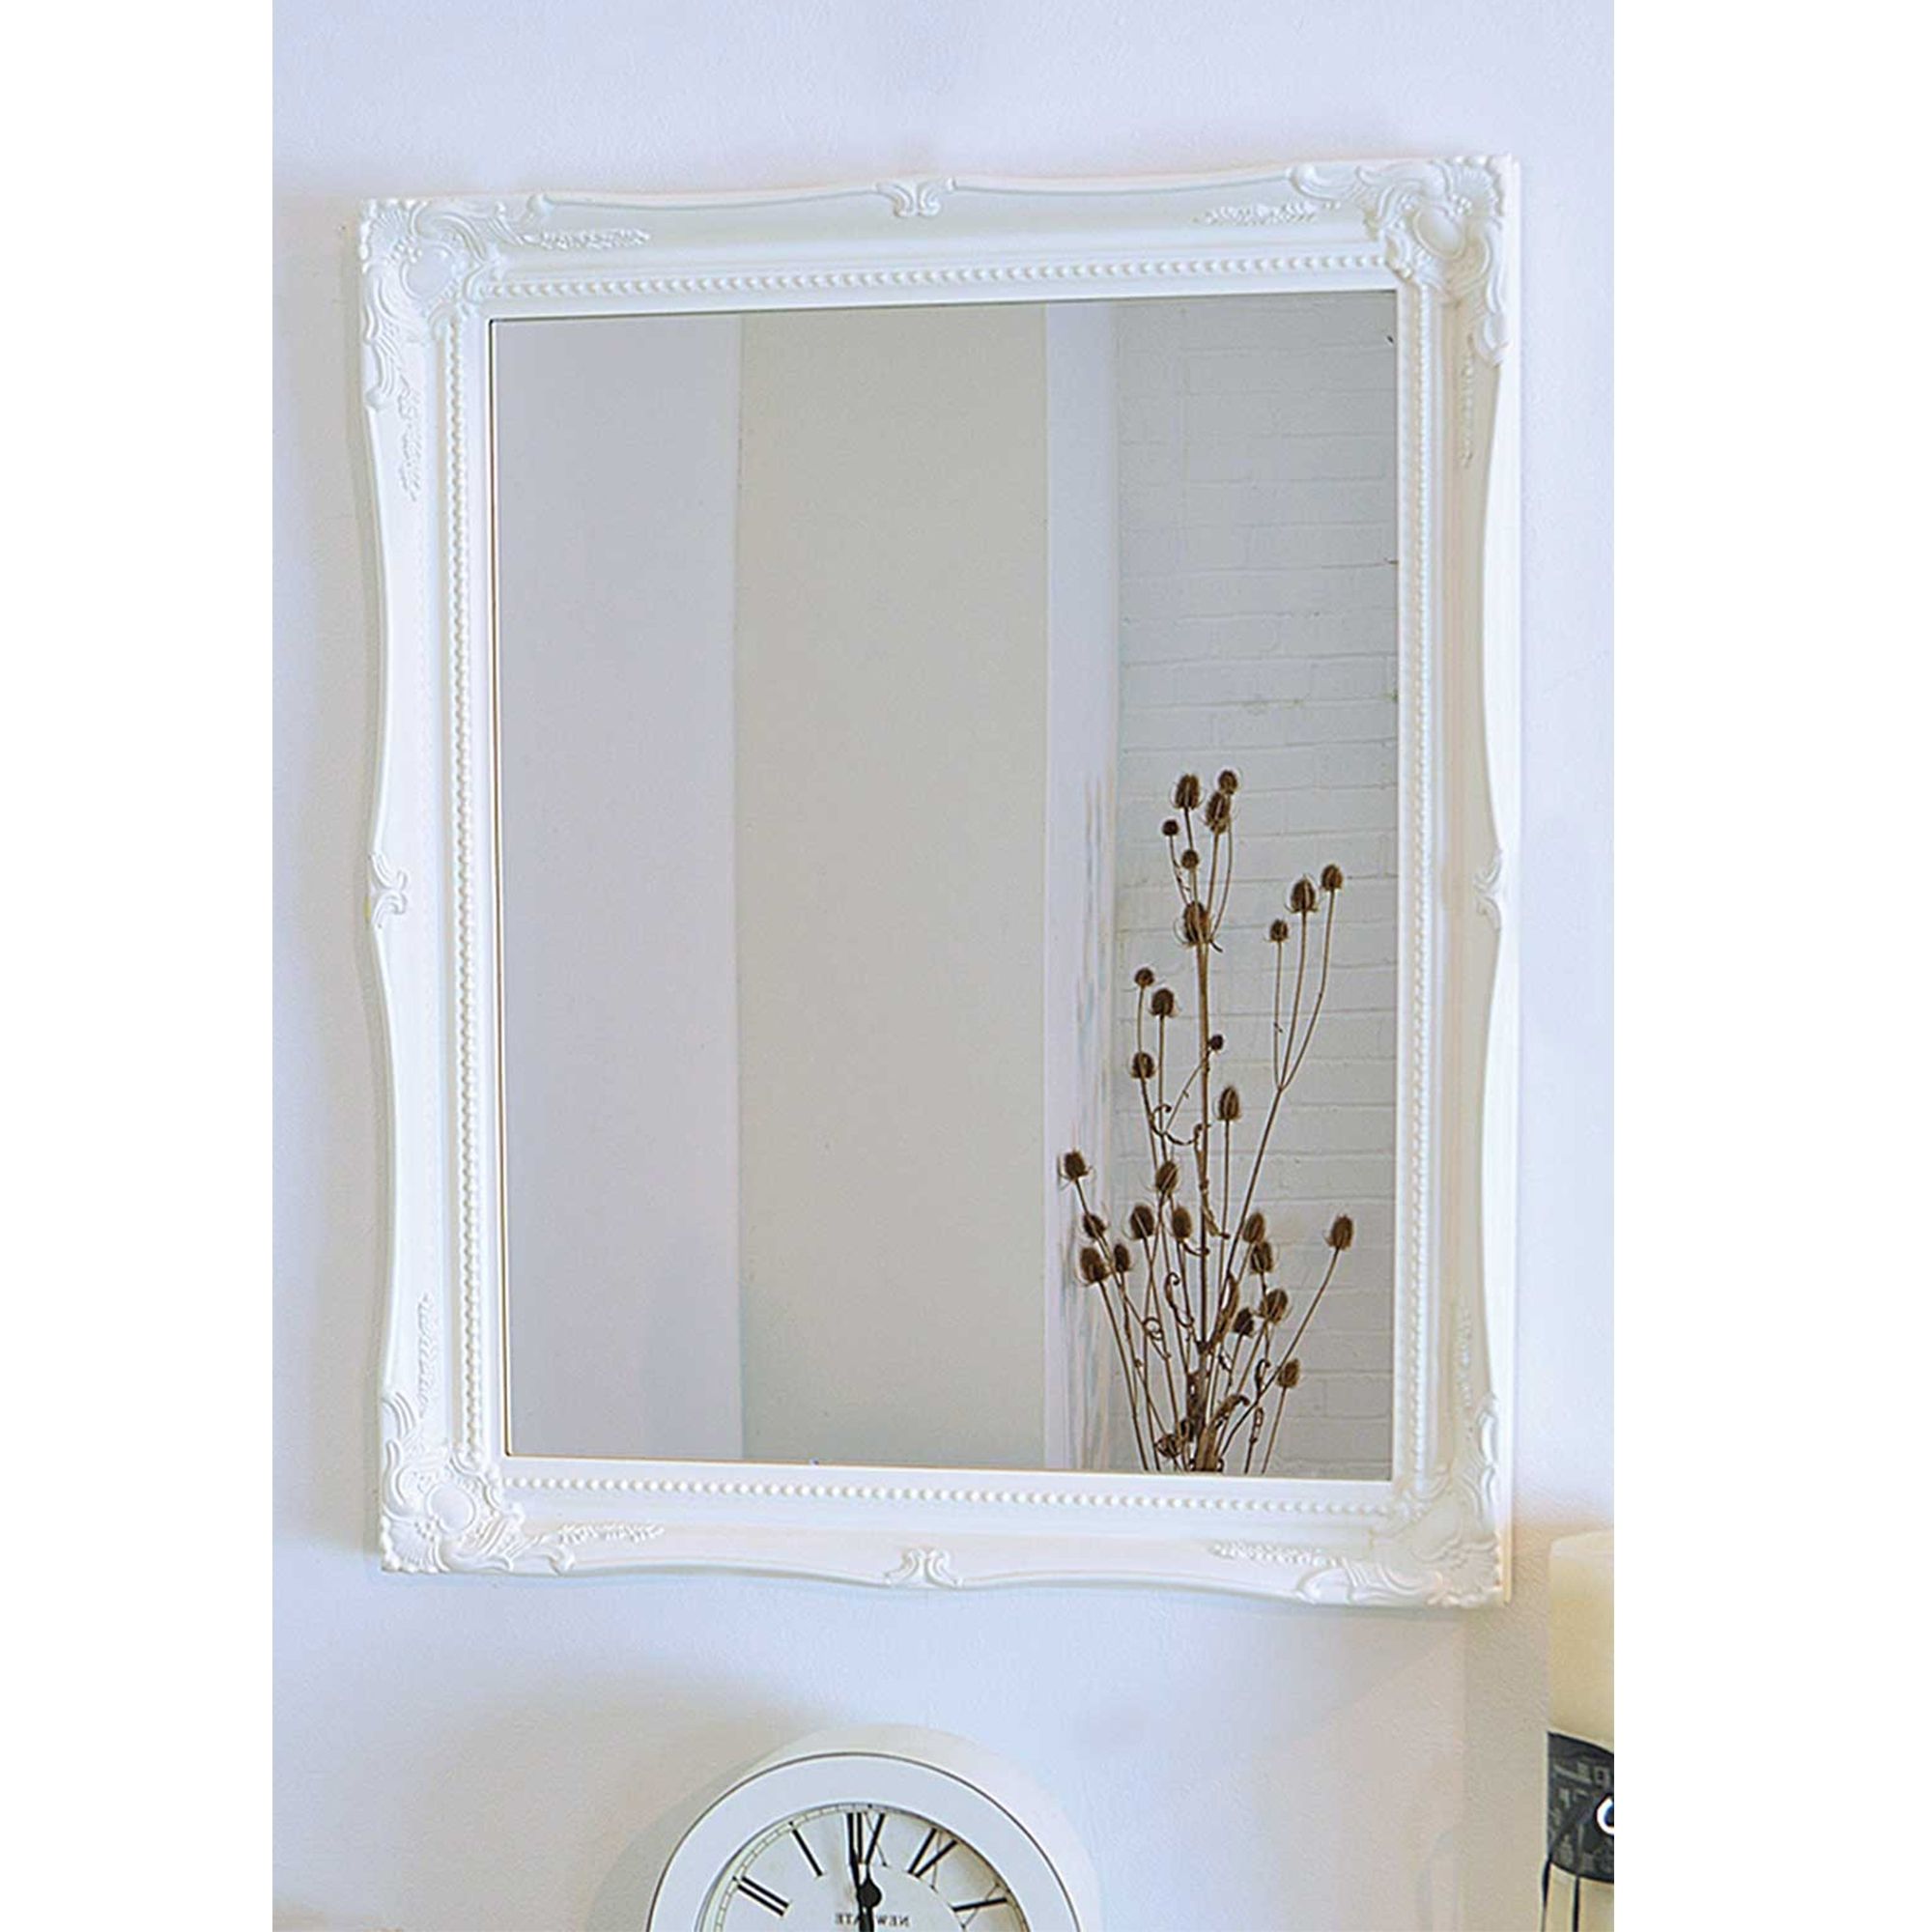 2019 Ornate Antique French Style Wall Mirror Intended For White Framed Wall Mirrors (View 11 of 20)